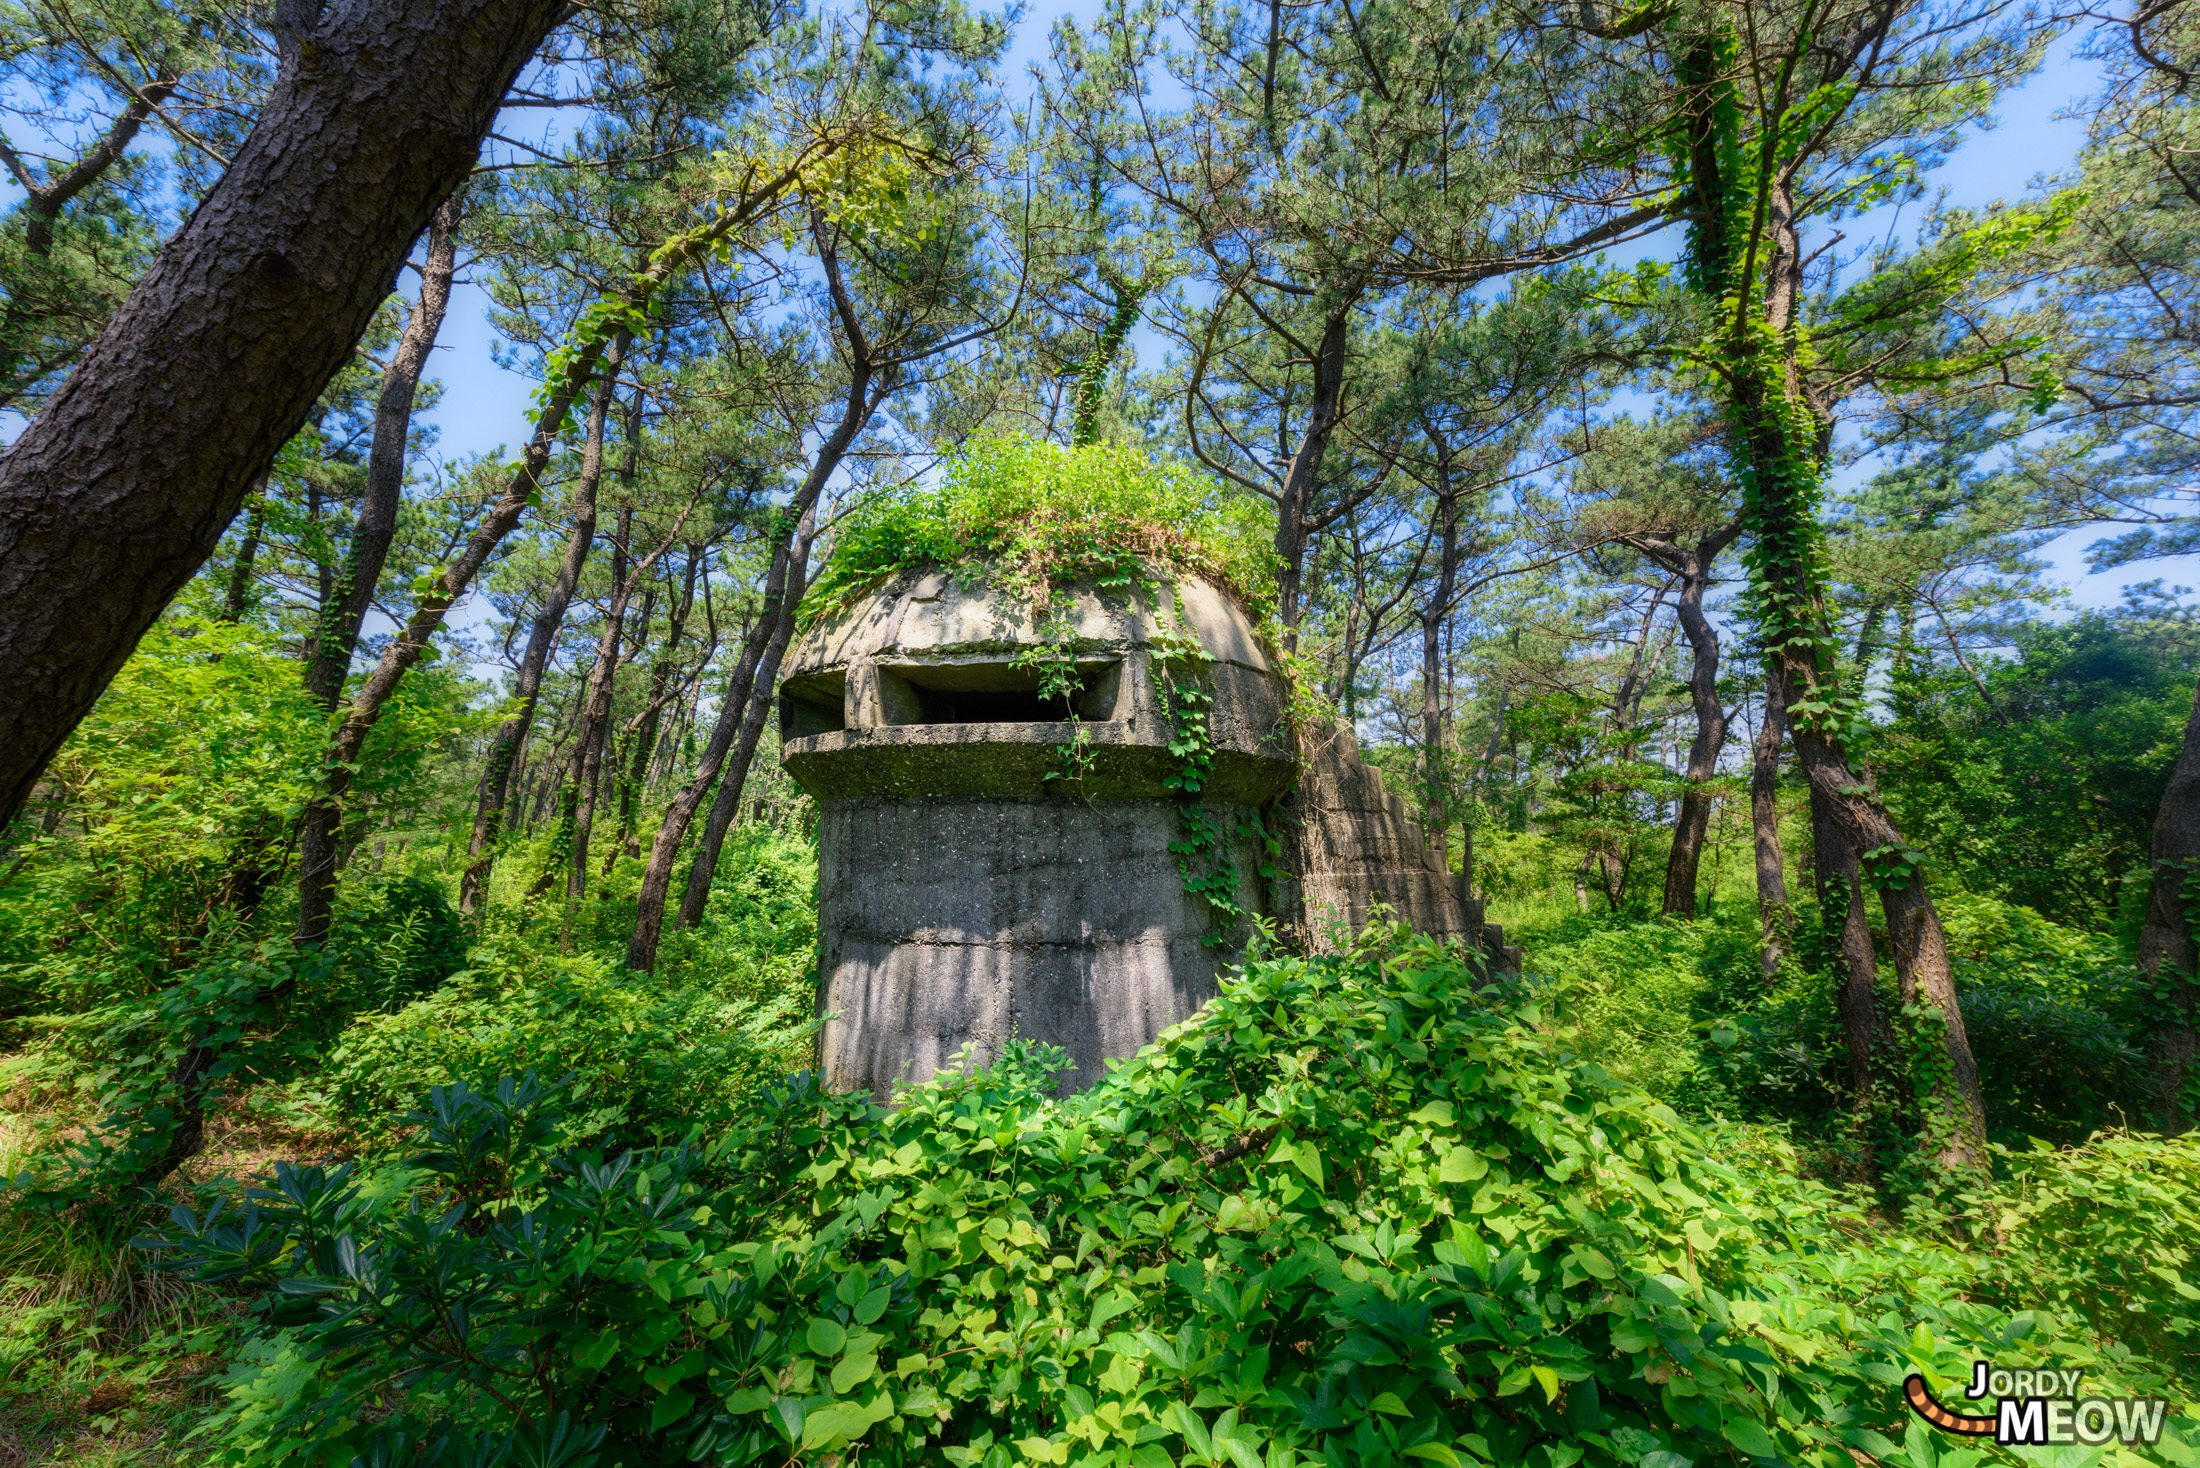 Tranquil scene of nature reclaiming historic structure at Futtsu Park in Japan.